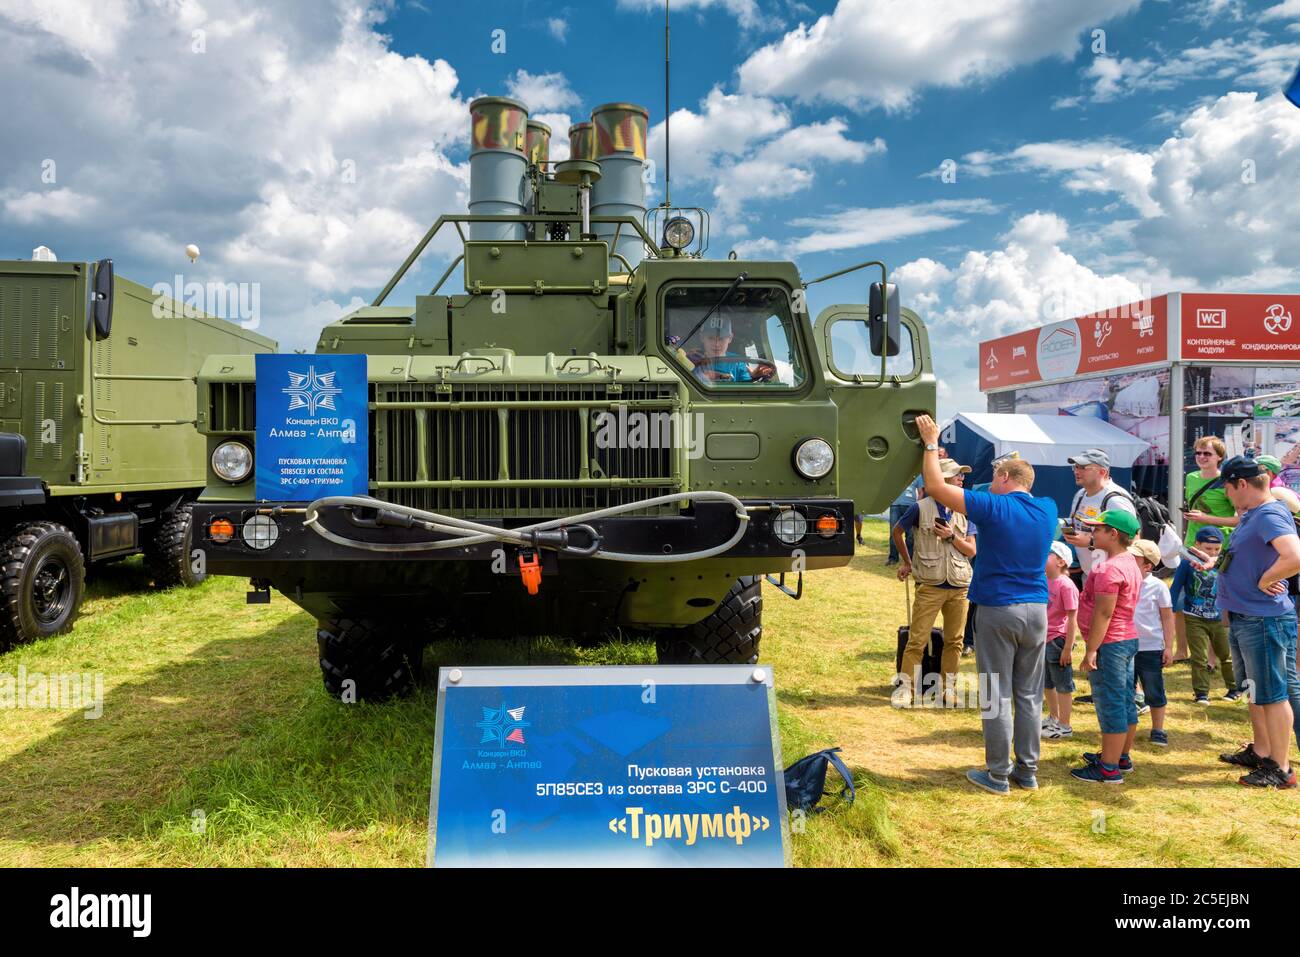 Moscow Region - July 21, 2017: Visitors examine the S-400 Triumf russian missile system at the International Aviation and Space Salon (MAKS). Stock Photo